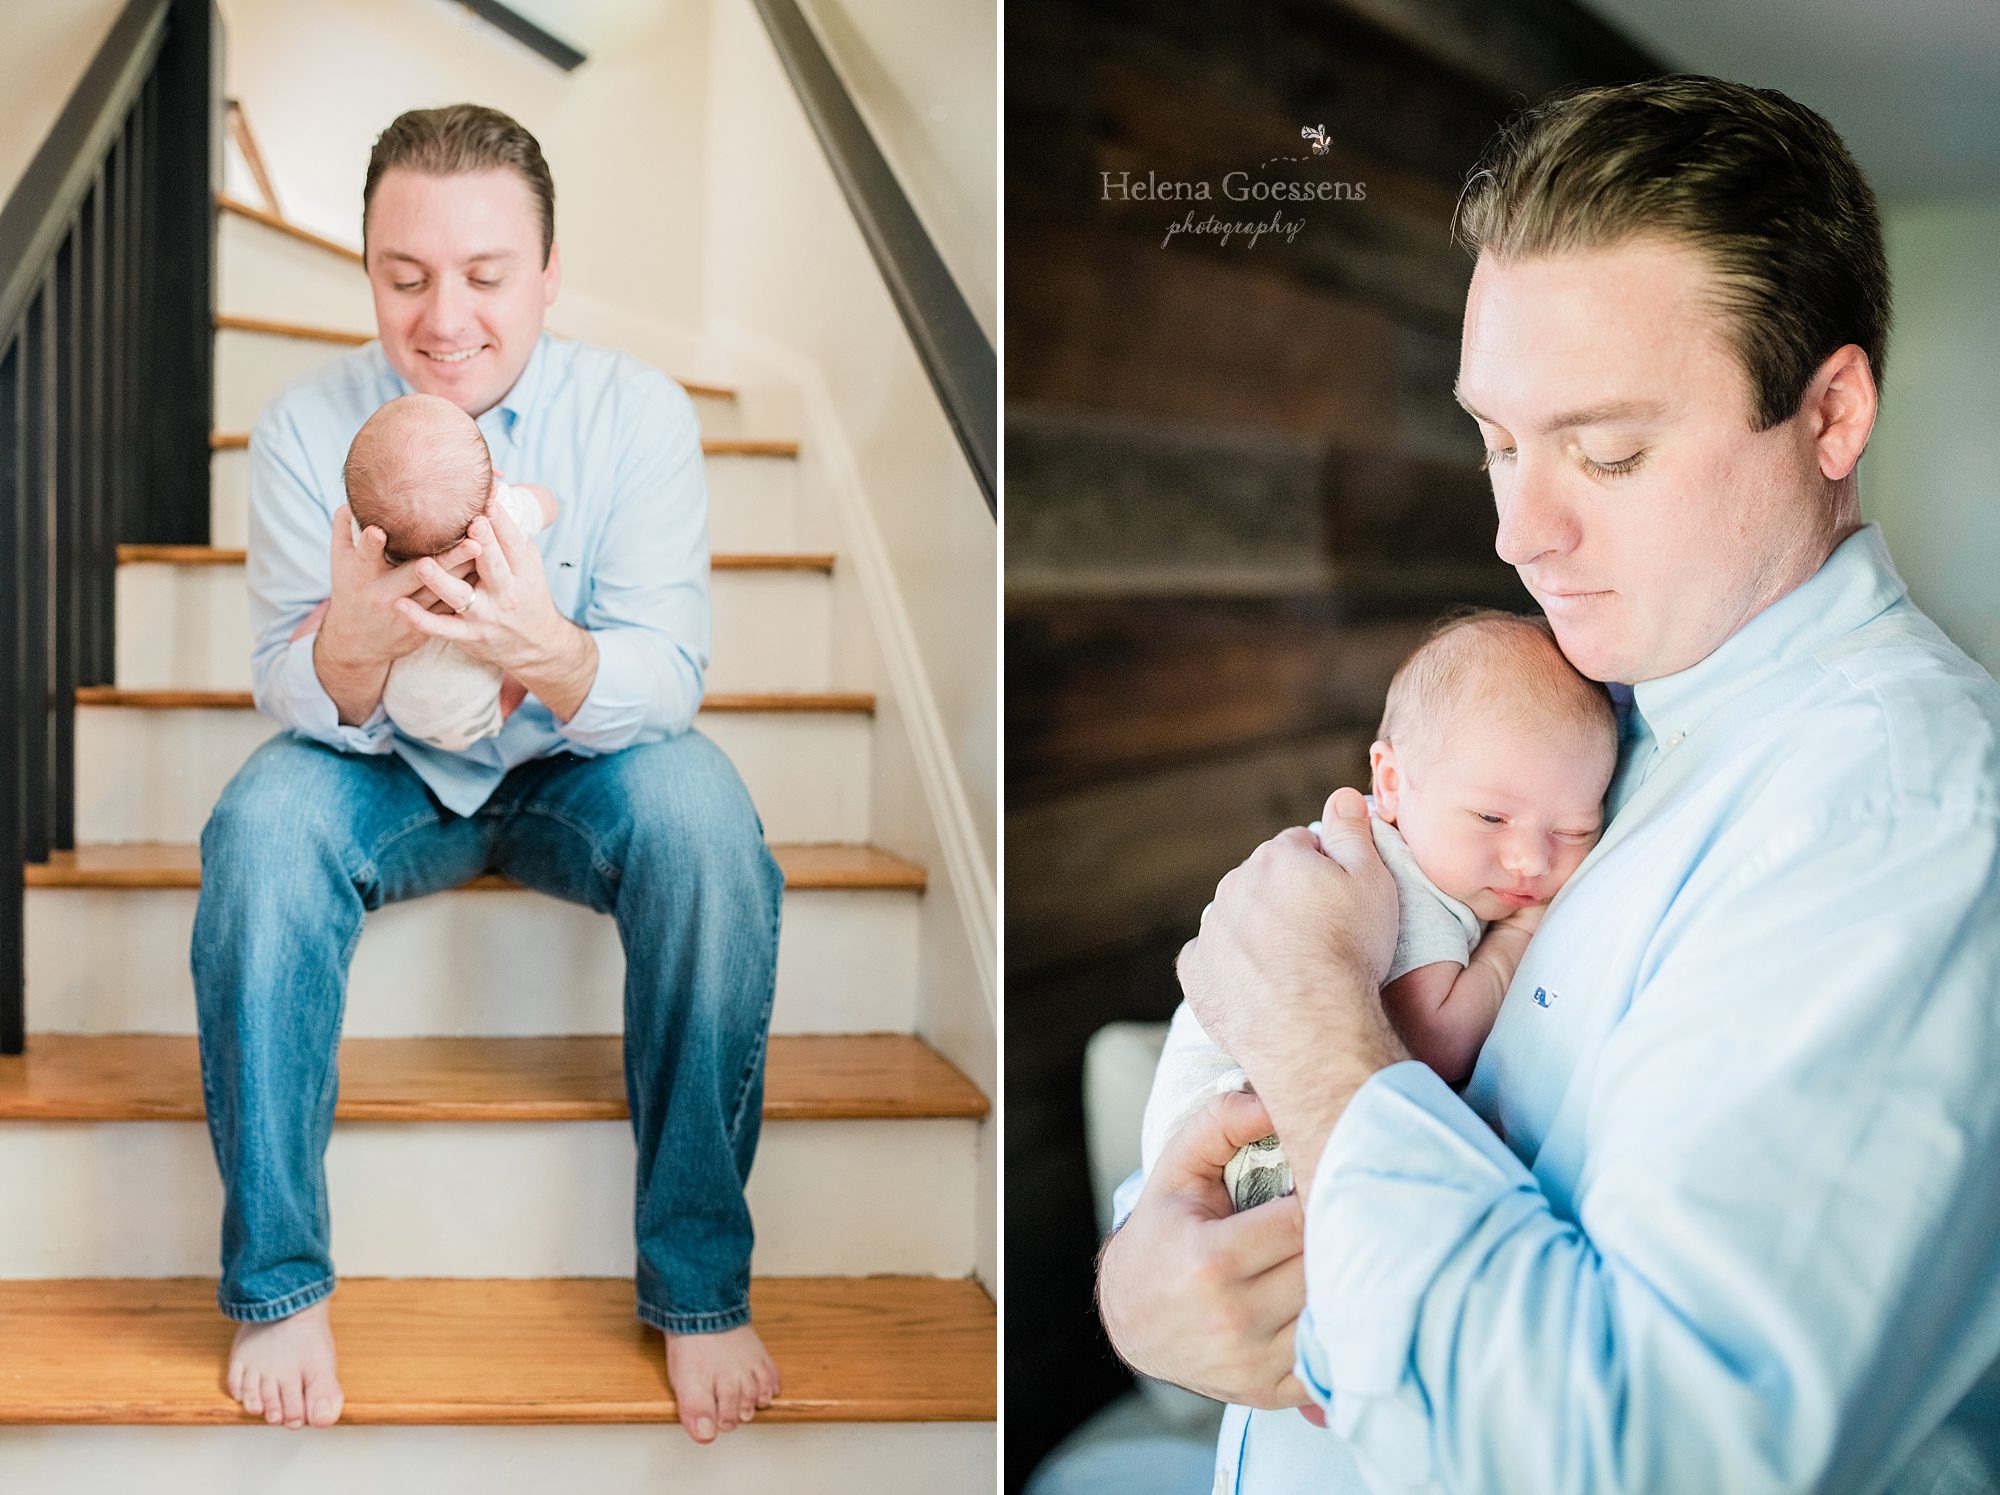 father and son during newborn portraits with Helena Goessens